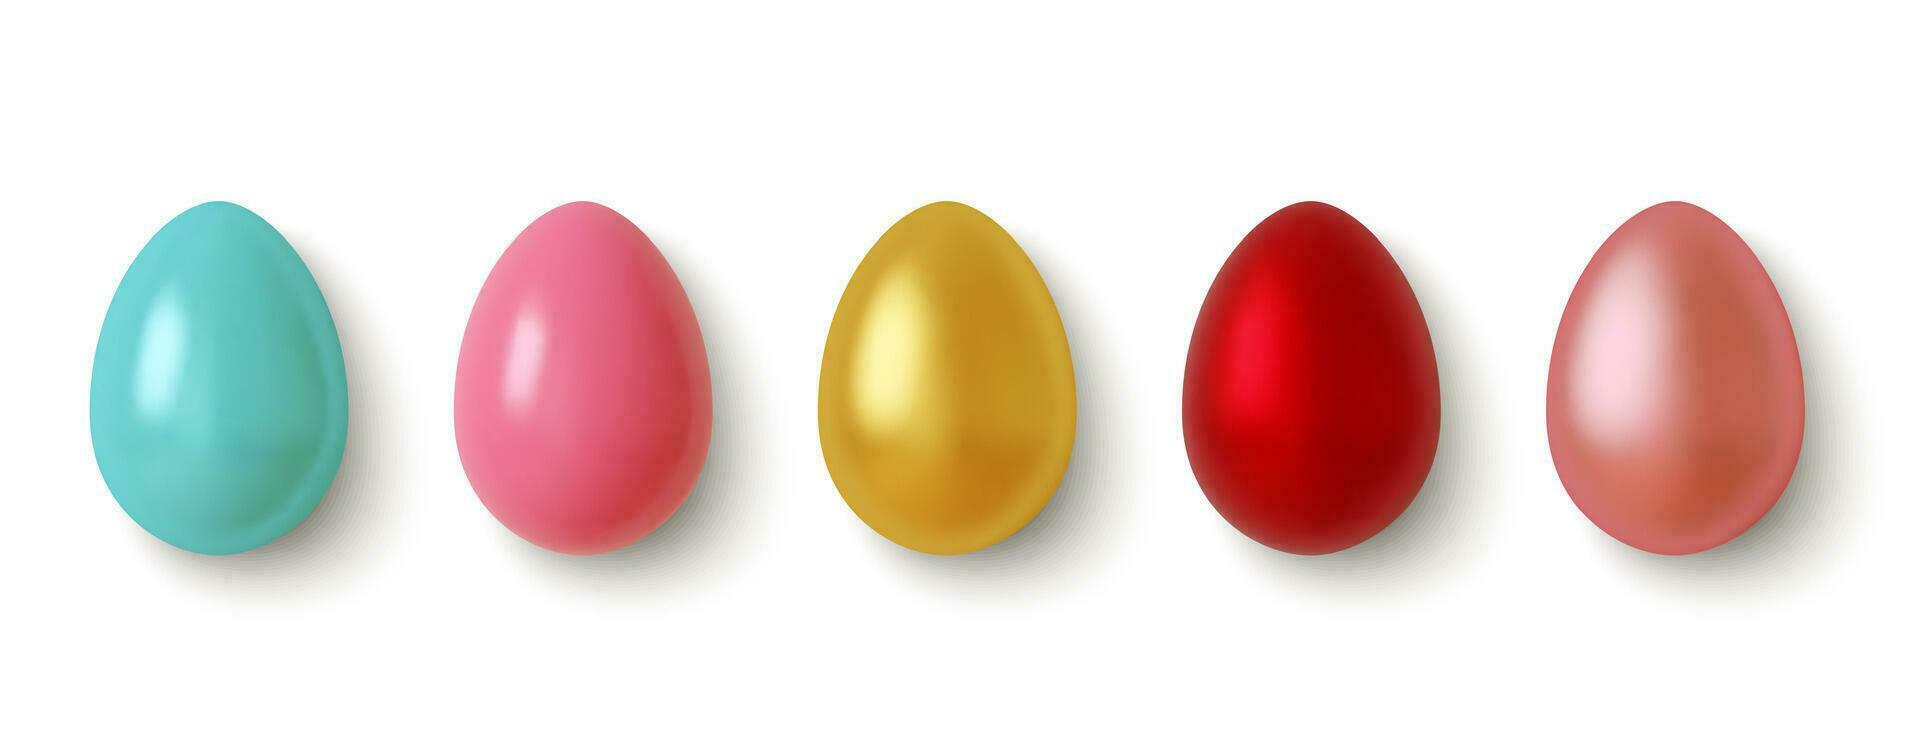 Set of 3D realistic, golden, pink, blue and red Easter eggs isolated on white background. Vector